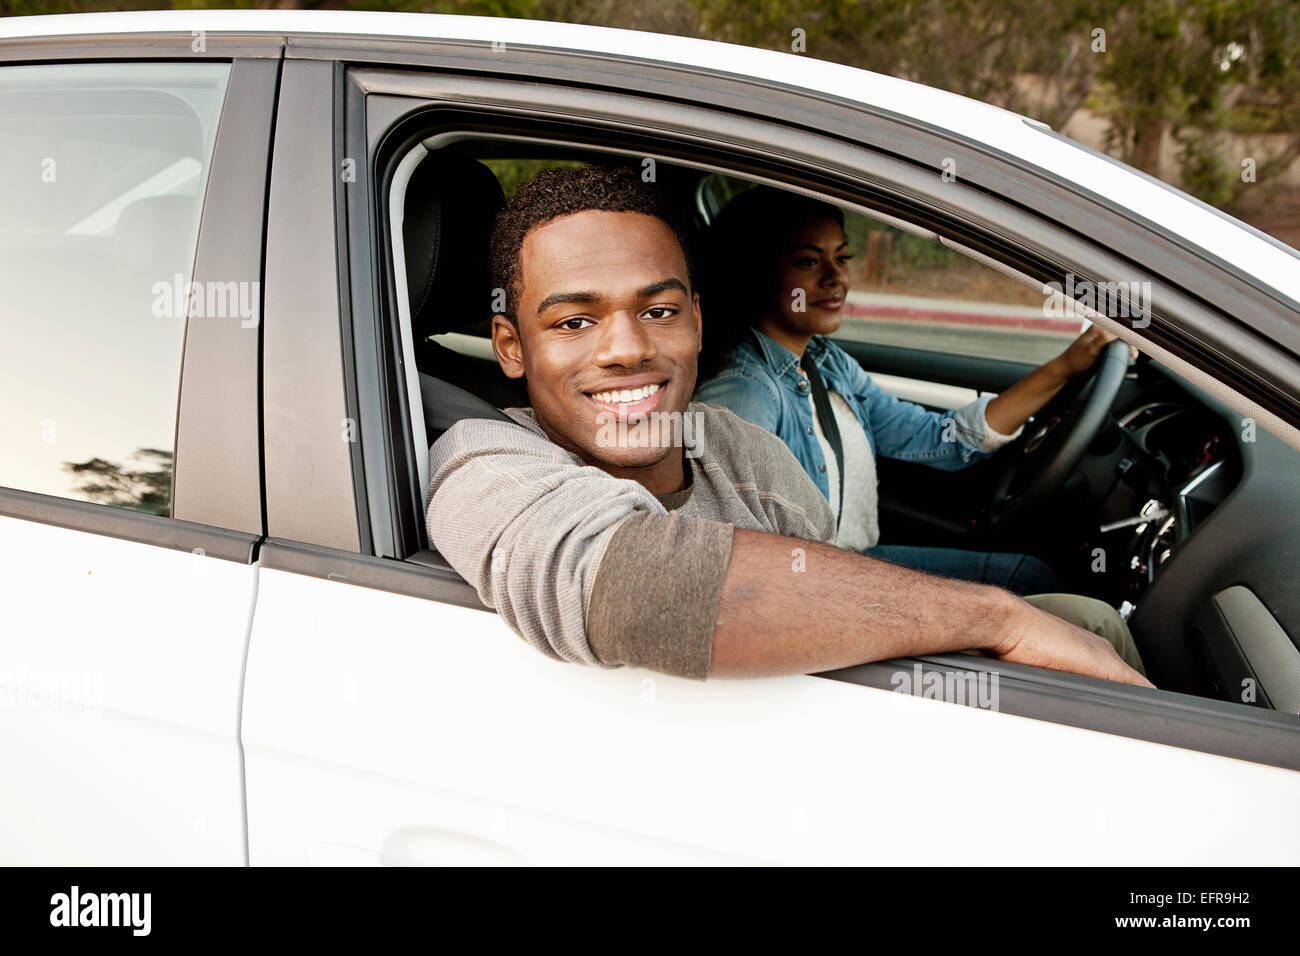 Portrait of young man looking out of of car window Stock Photo